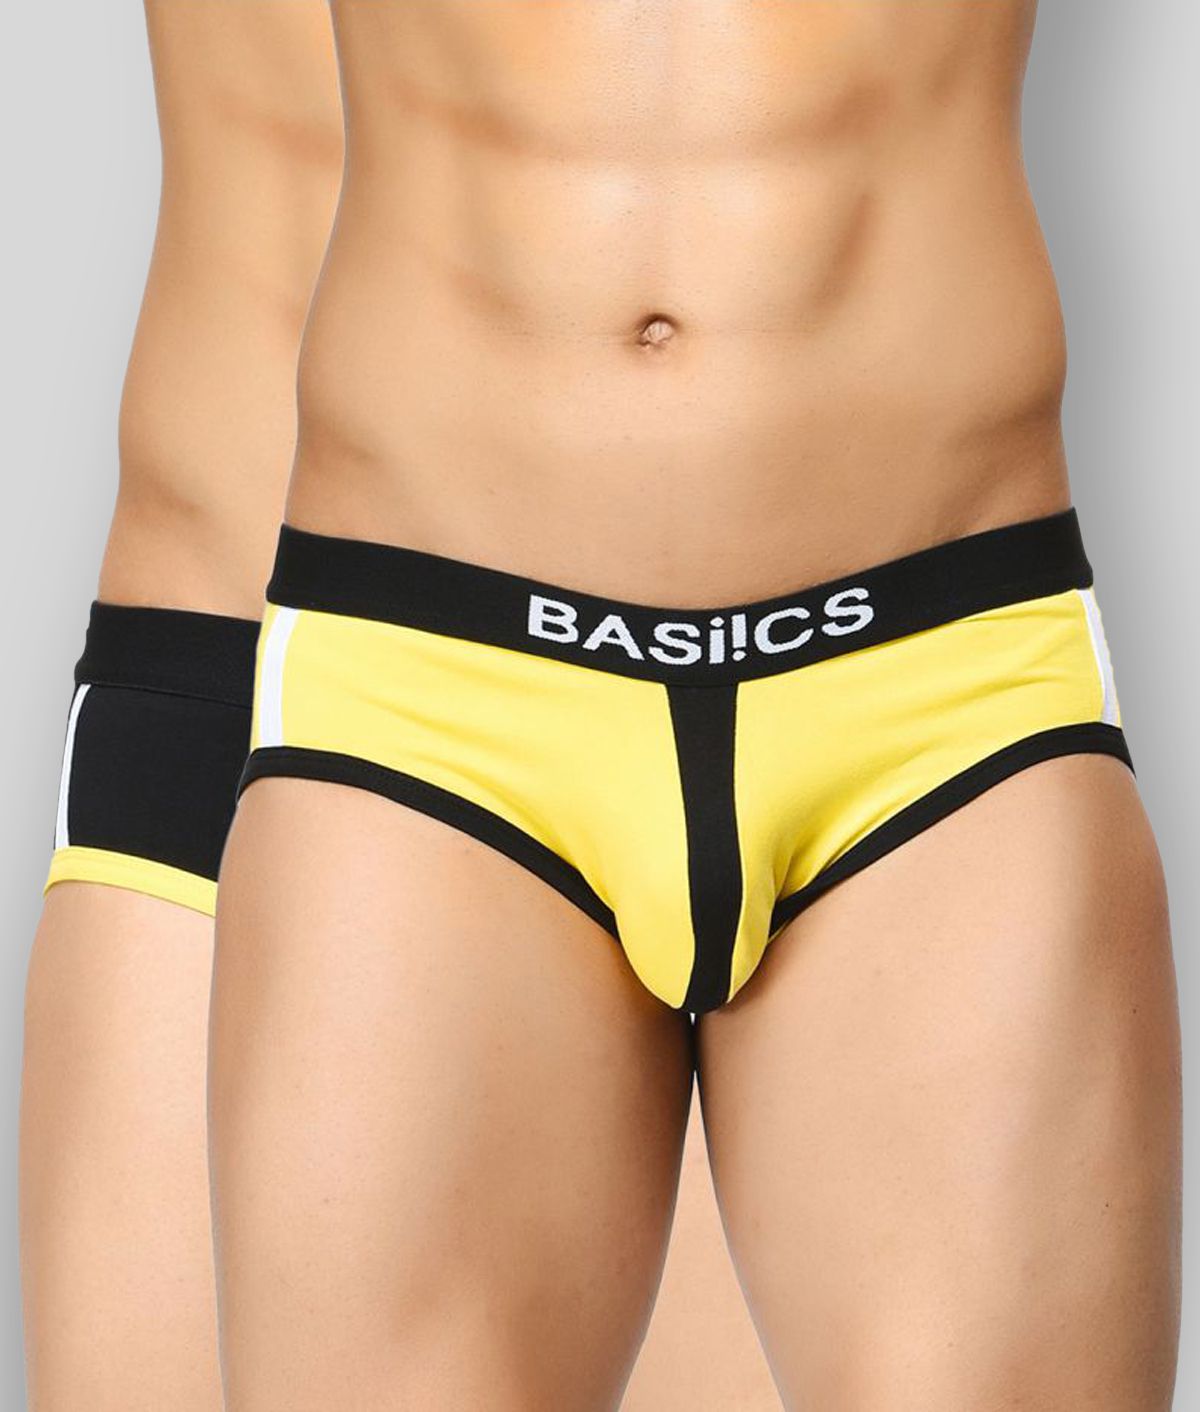     			BASIICS By La Intimo - Multicolor Cotton Men's Briefs ( Pack of 2 )